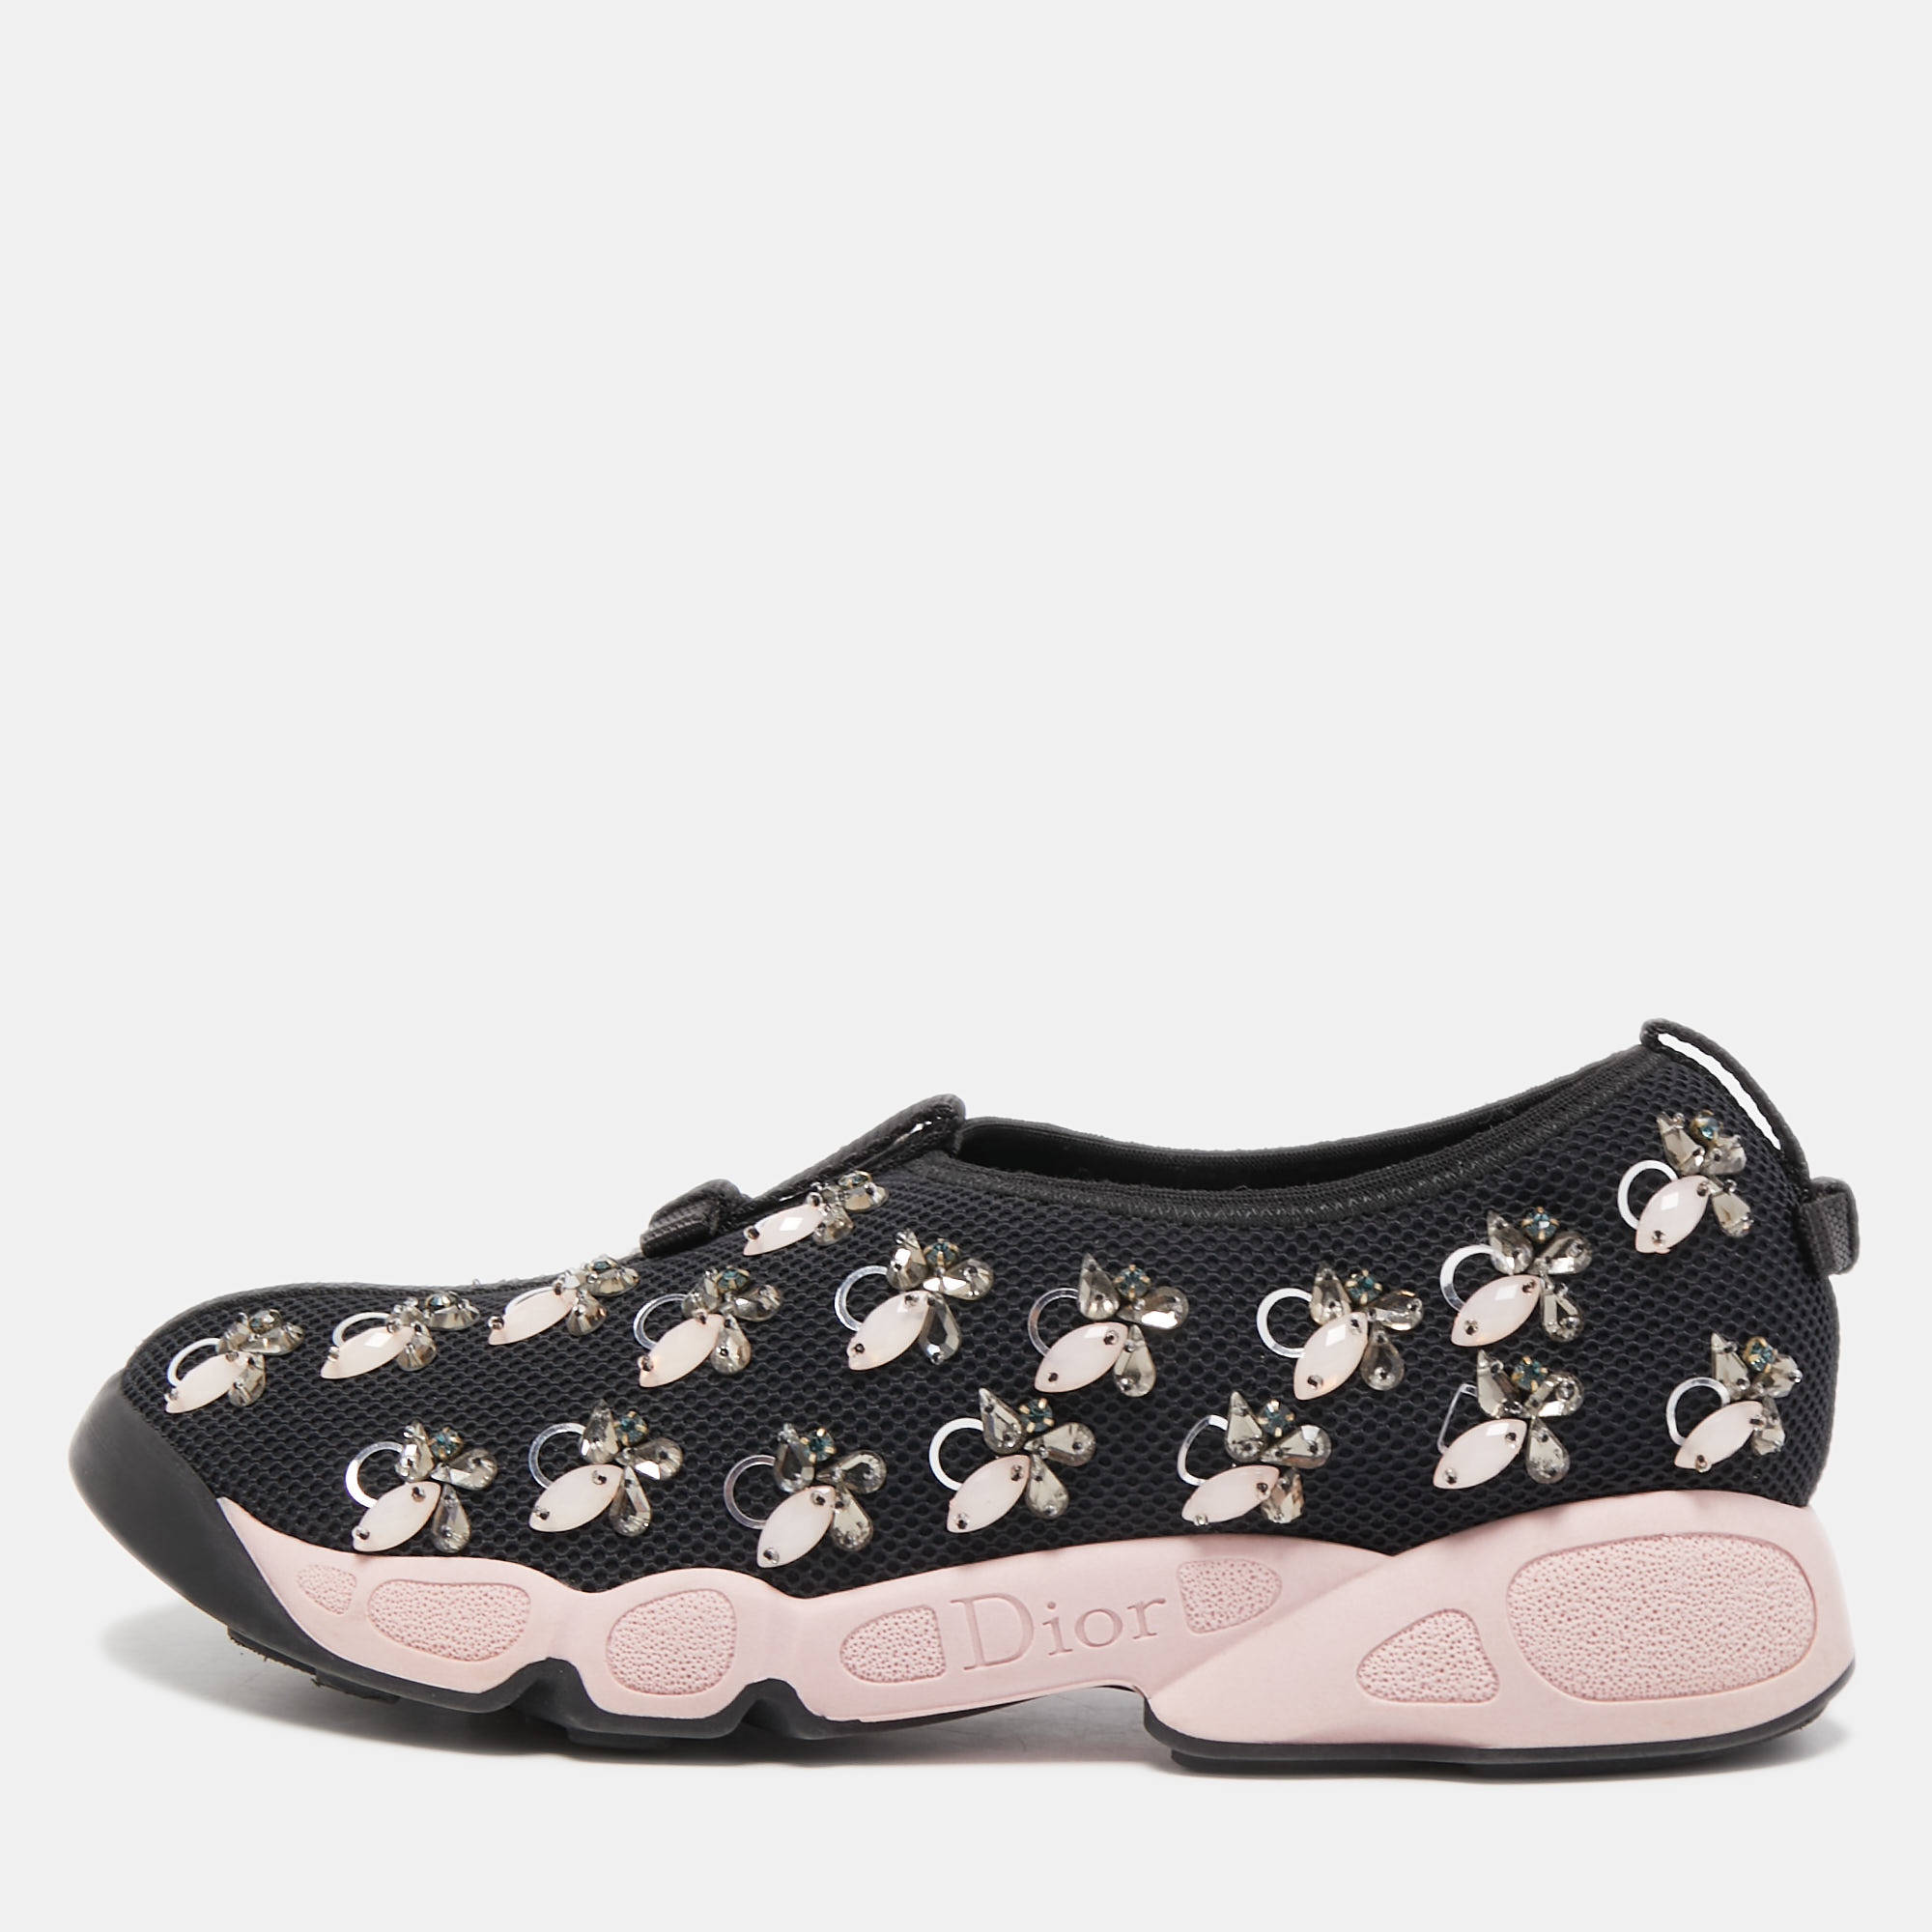 Dior Black/Pink Embellished Mesh Fusion Sneakers Size 38.5